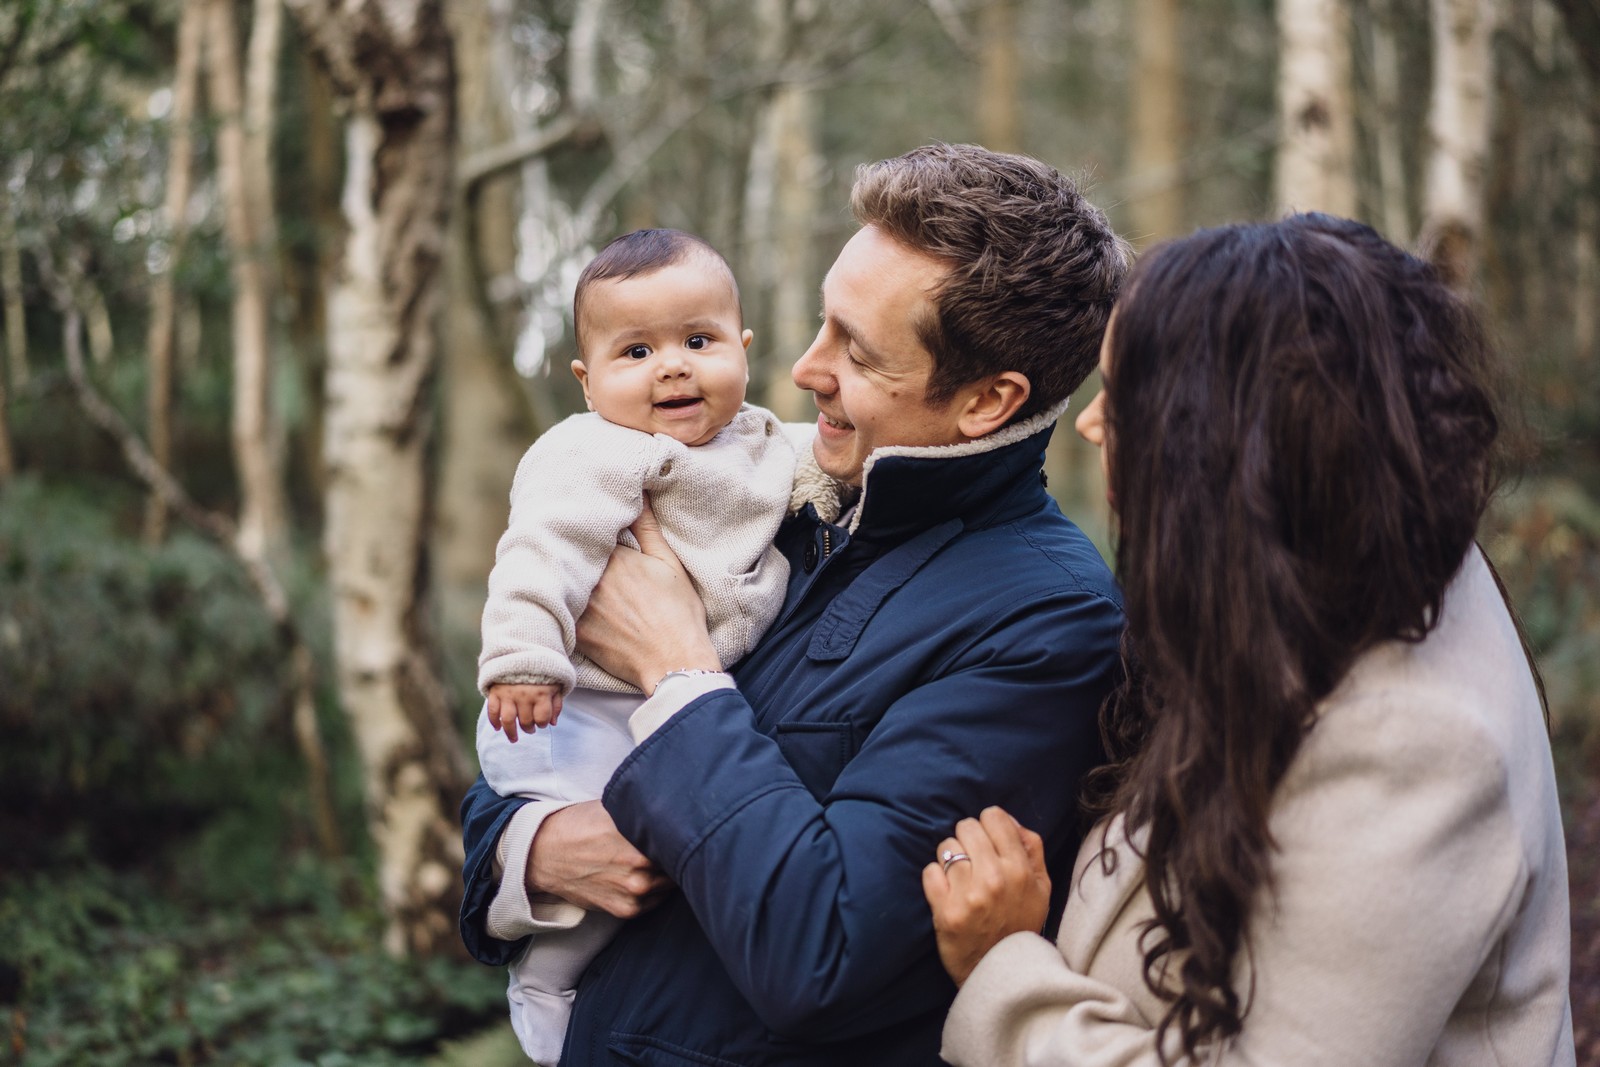 Baby photoshoot in the woods // Zach